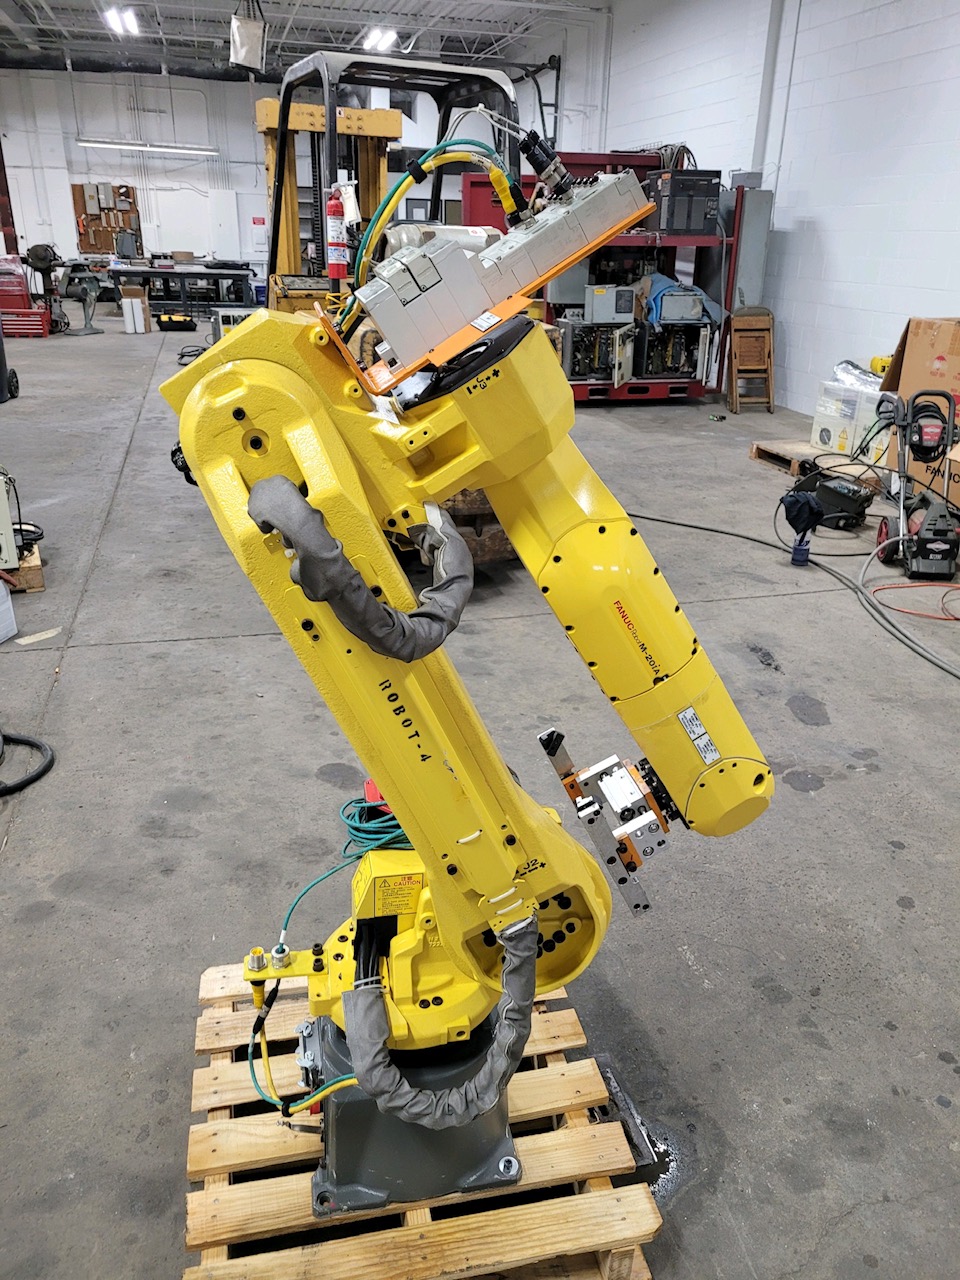 Considerations for Material Handling Automation